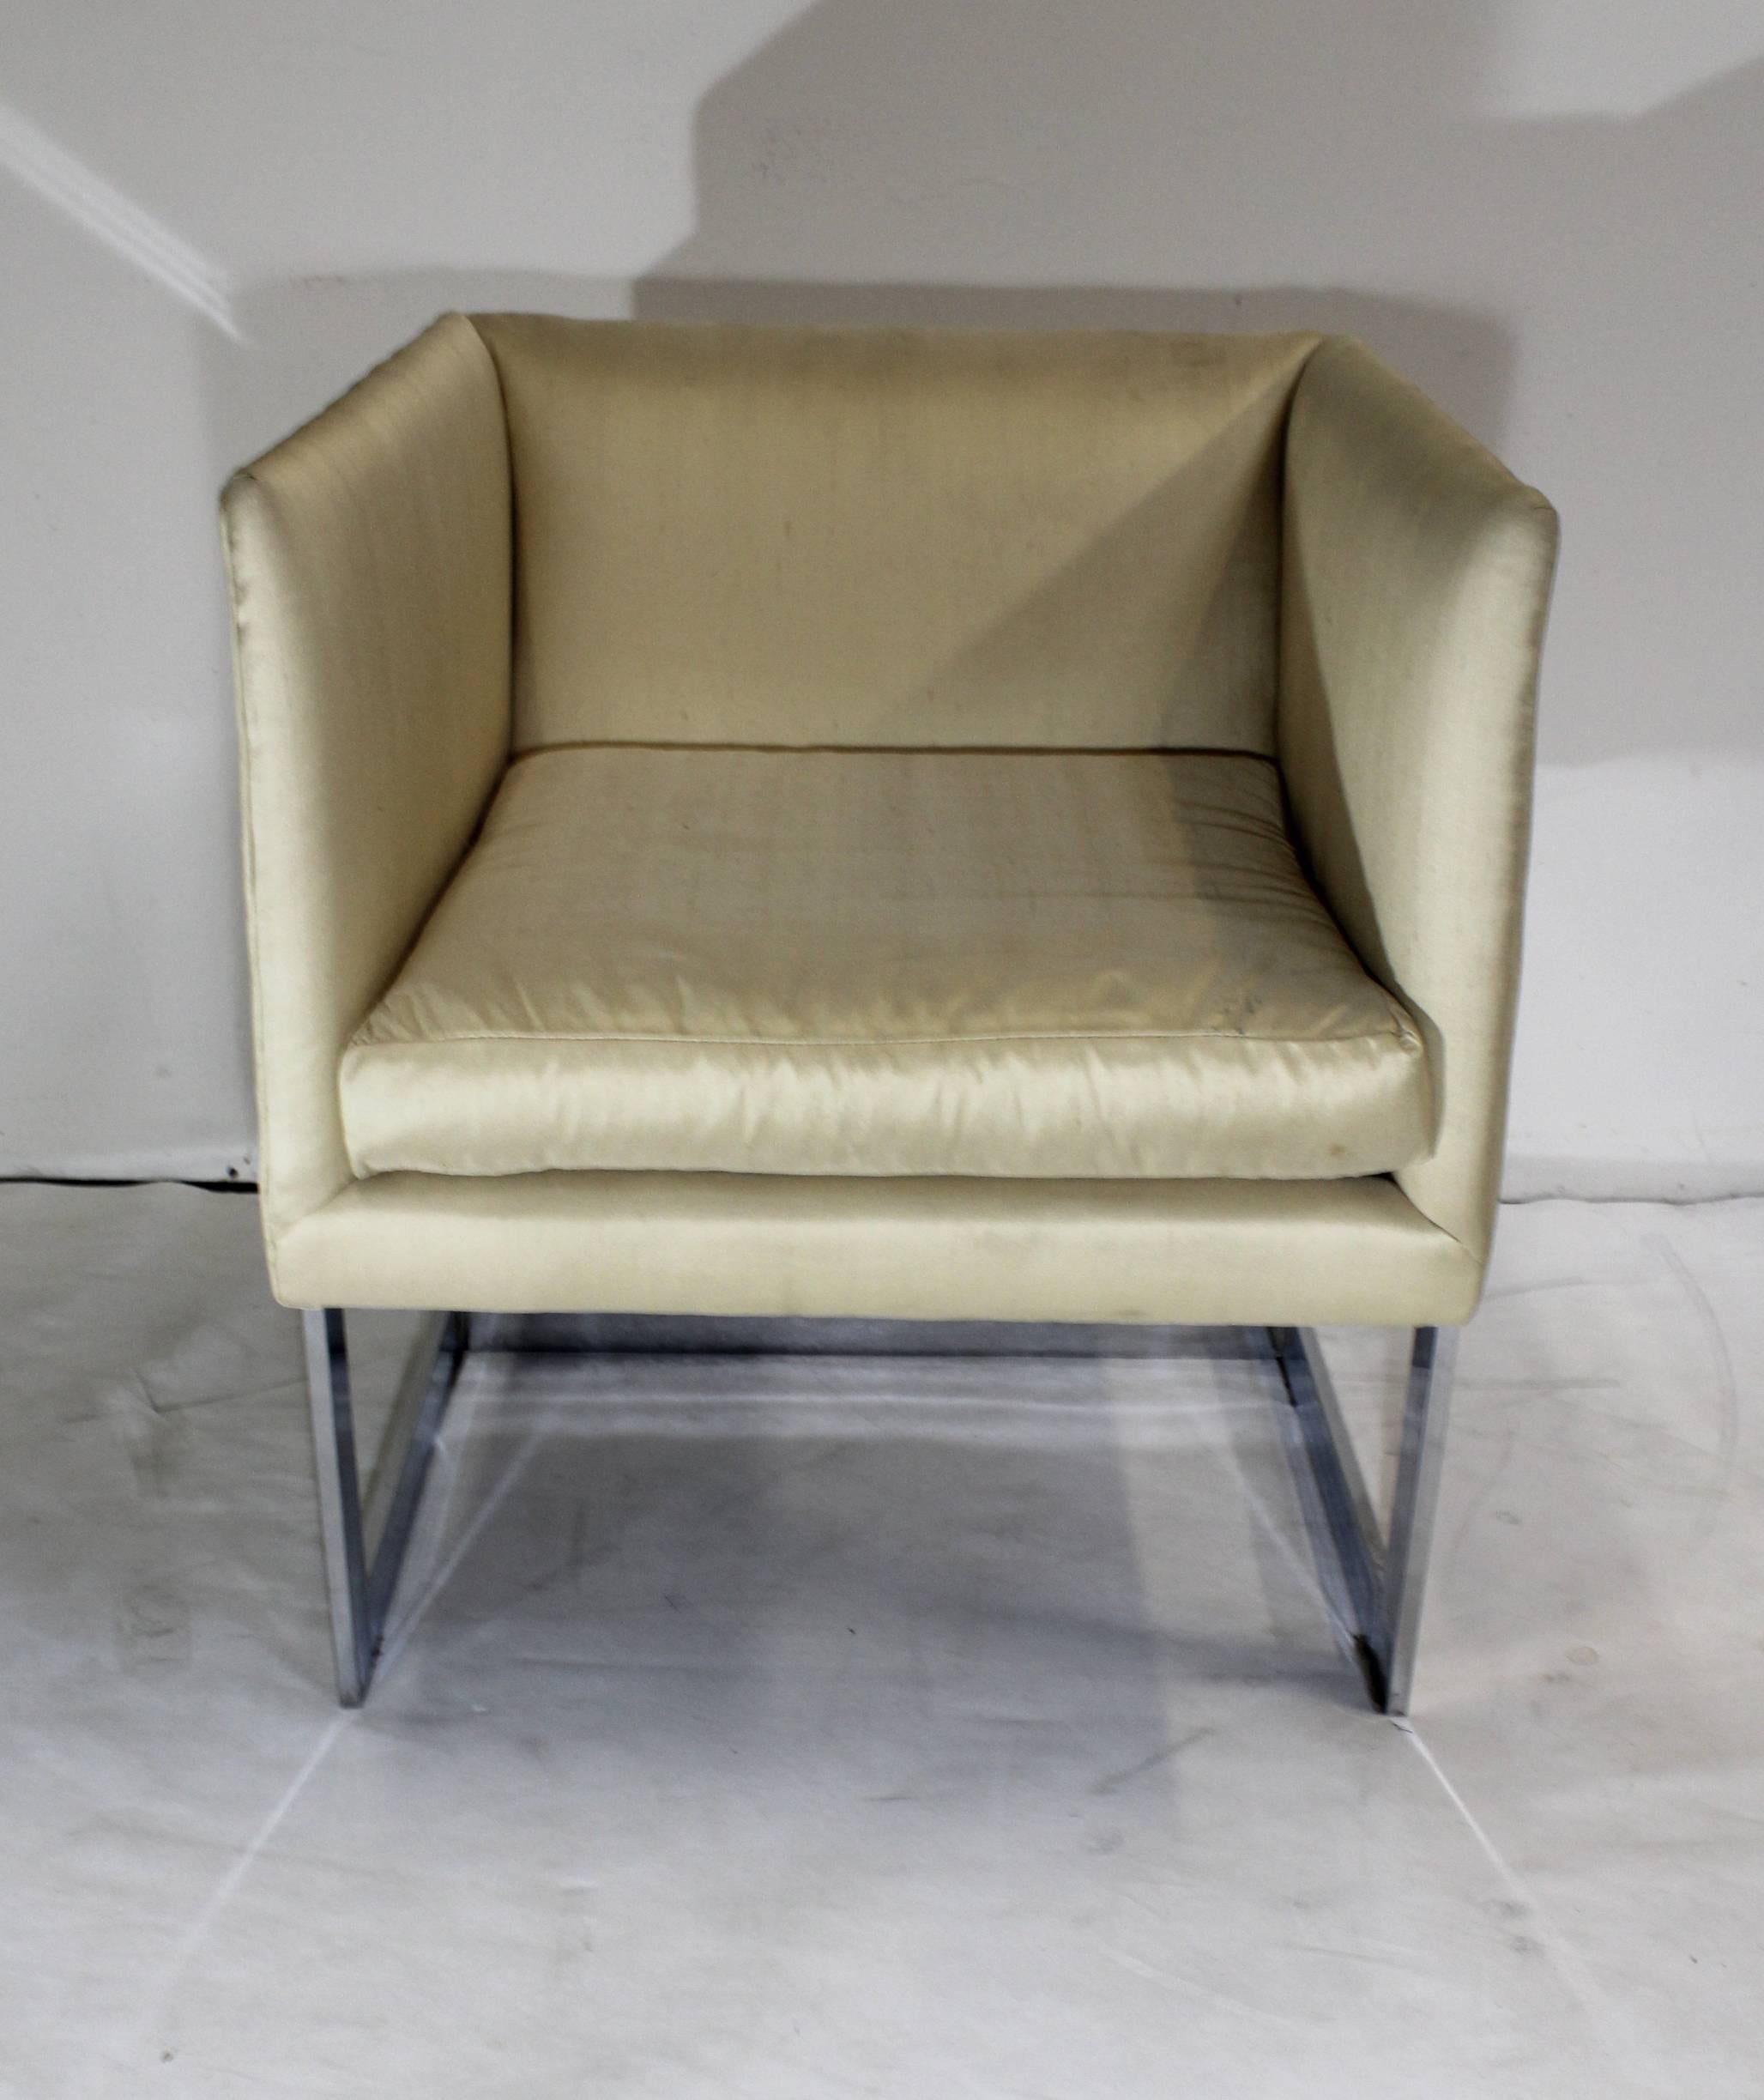 Small cube chrome and silken material chair, attributed to Milo Baughman (unfortunately is unlabeled). Has light staining on fabric (pictured).